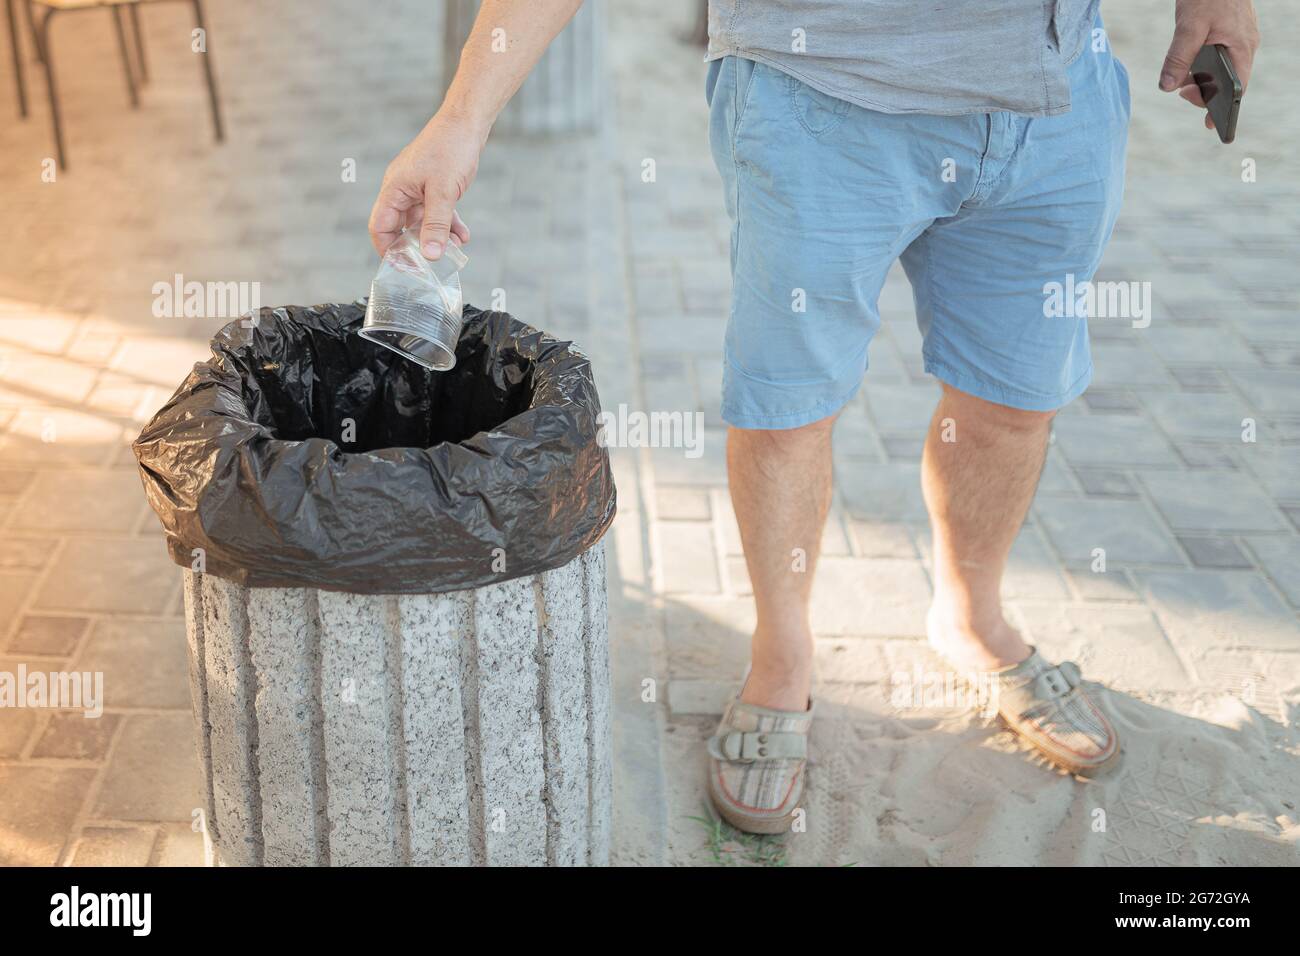 A man throws an empty plastic cup into a trash can Stock Photo